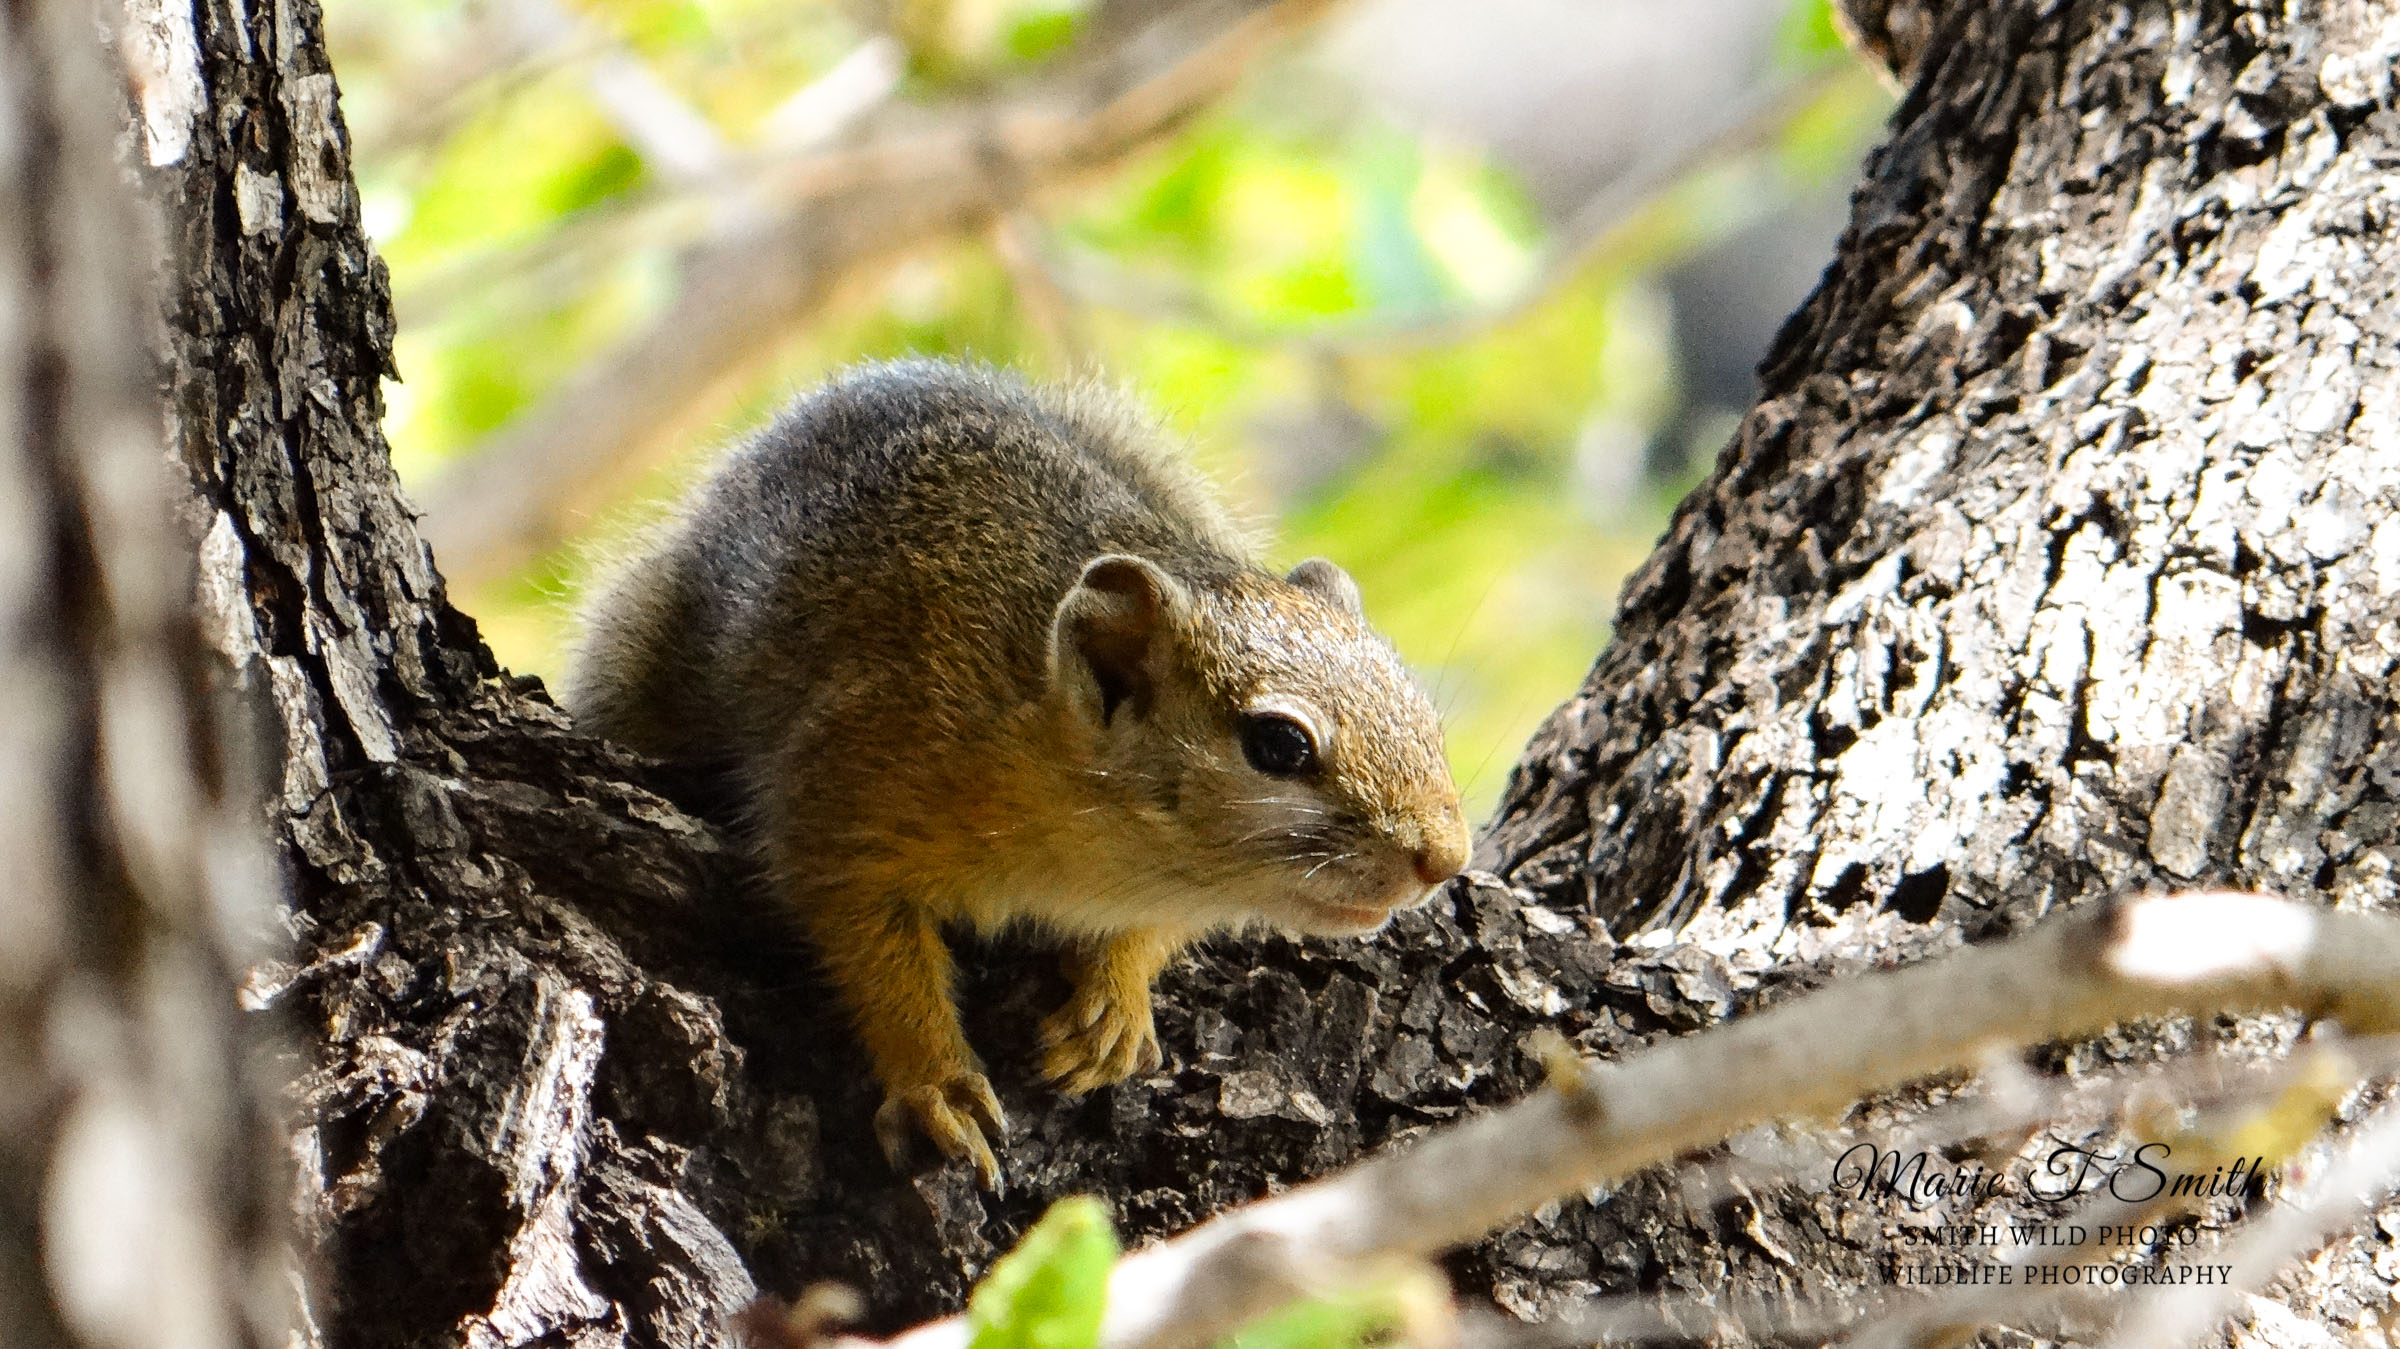 South African bush squirrel in a tree